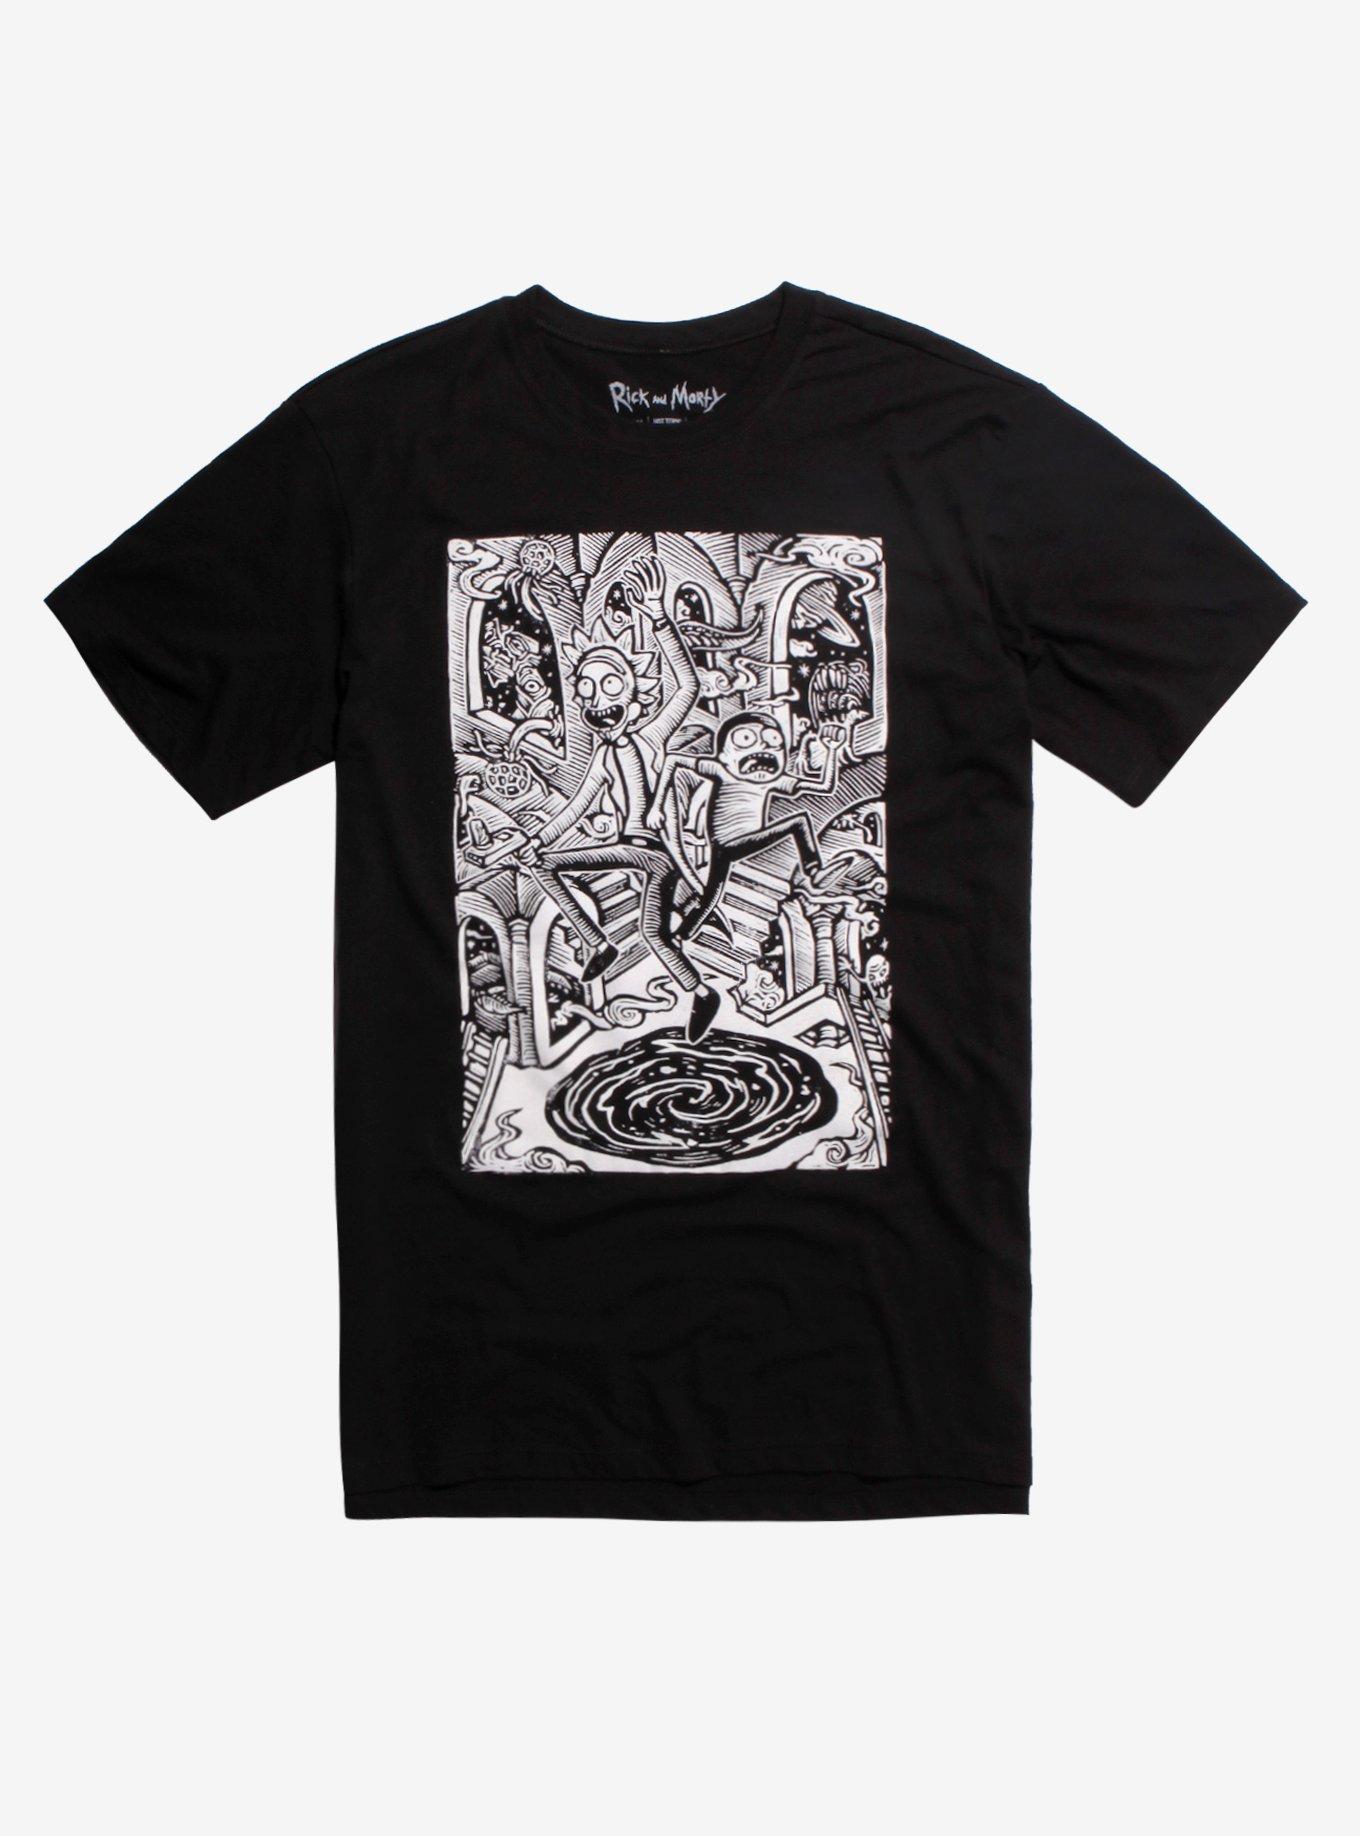 Rick And Morty Black & White Portal T-Shirt Hot Topic Exclusive | Hot Topic